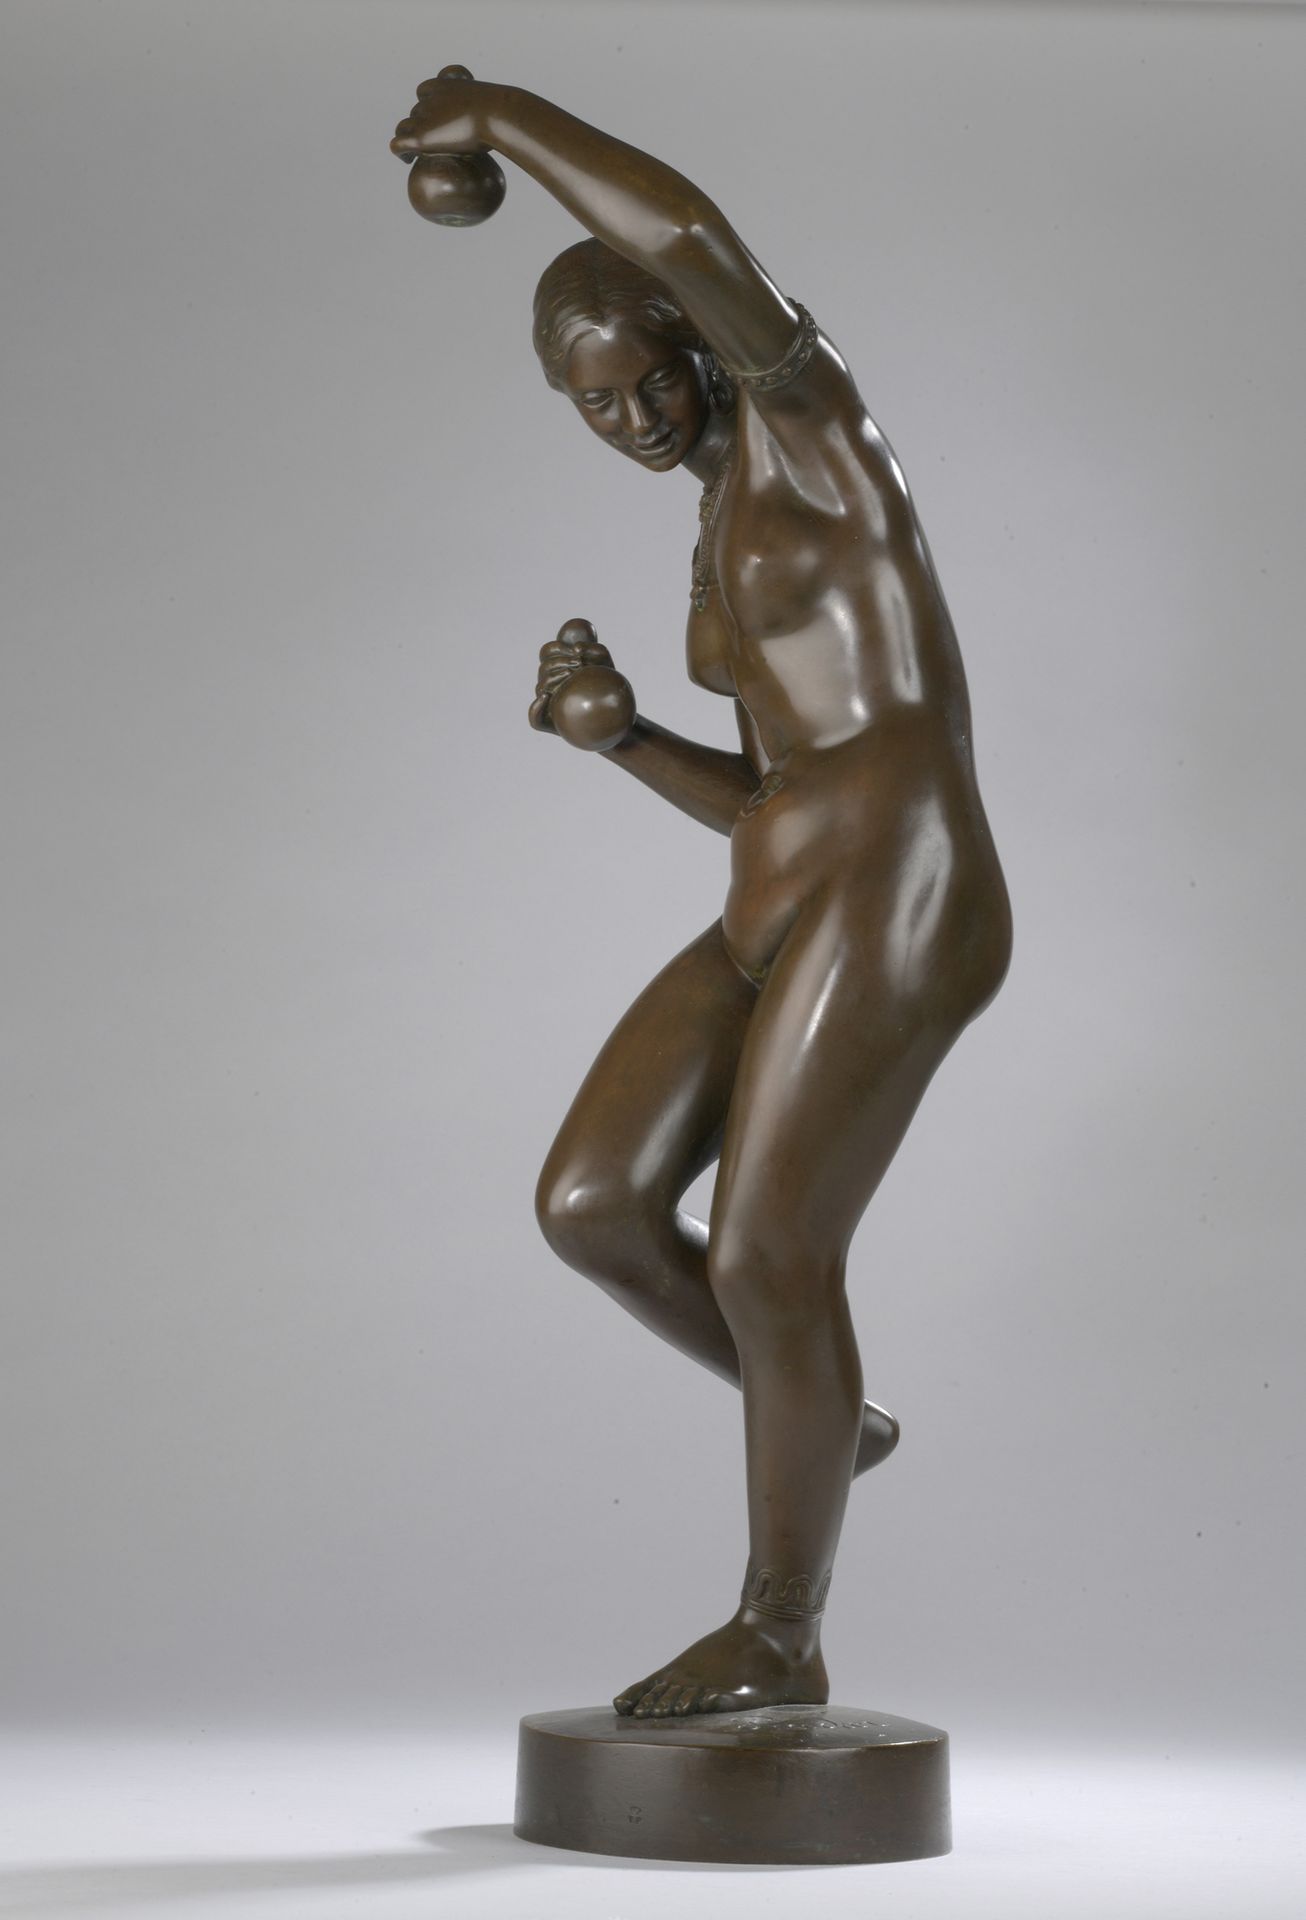 Null James PRADIER (1790-1852)

Nude dancer with calabashes

Model created in 18&hellip;